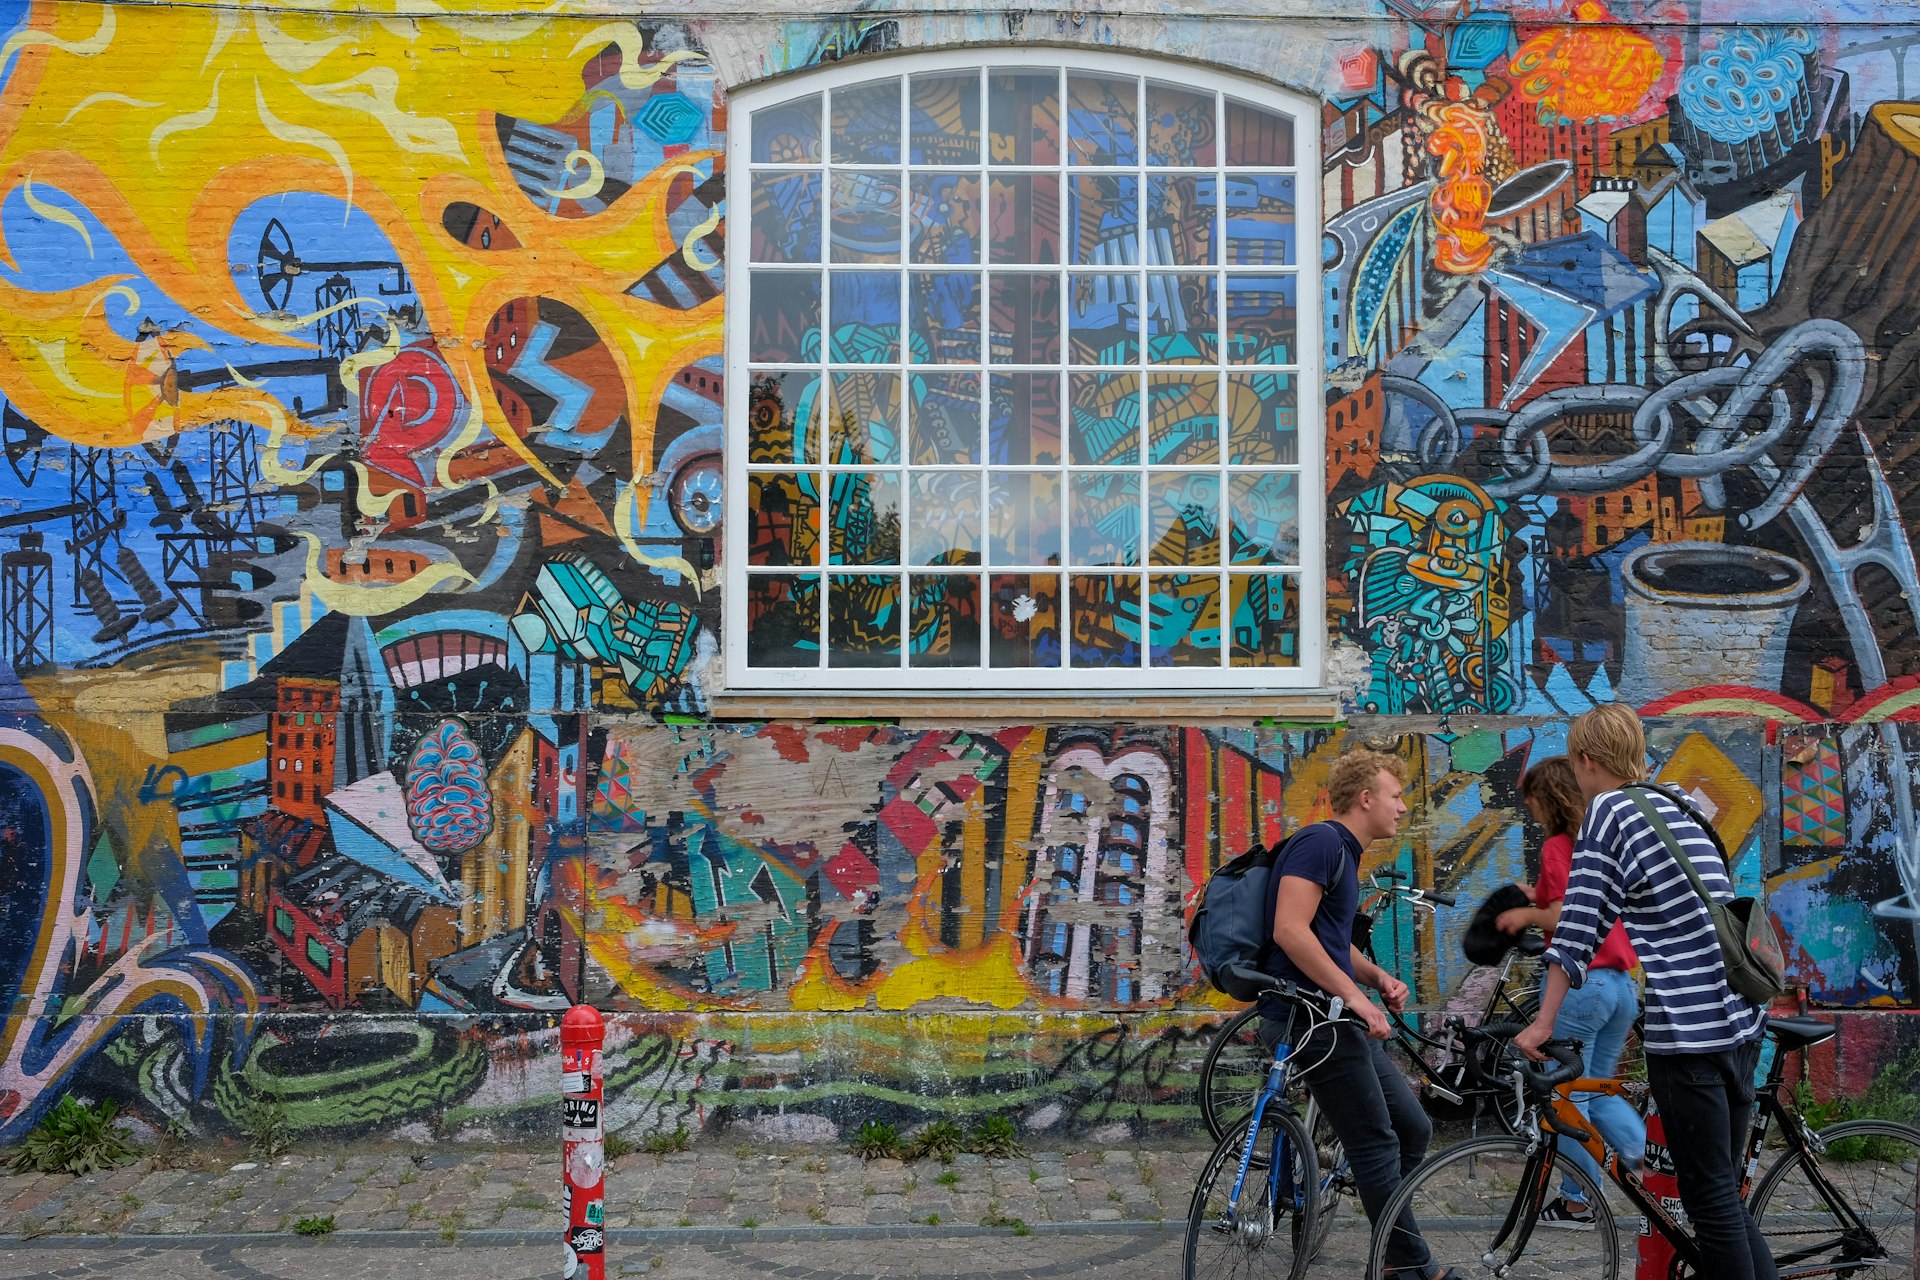 Two people with bikes in front of colourful walls covered in graffiti